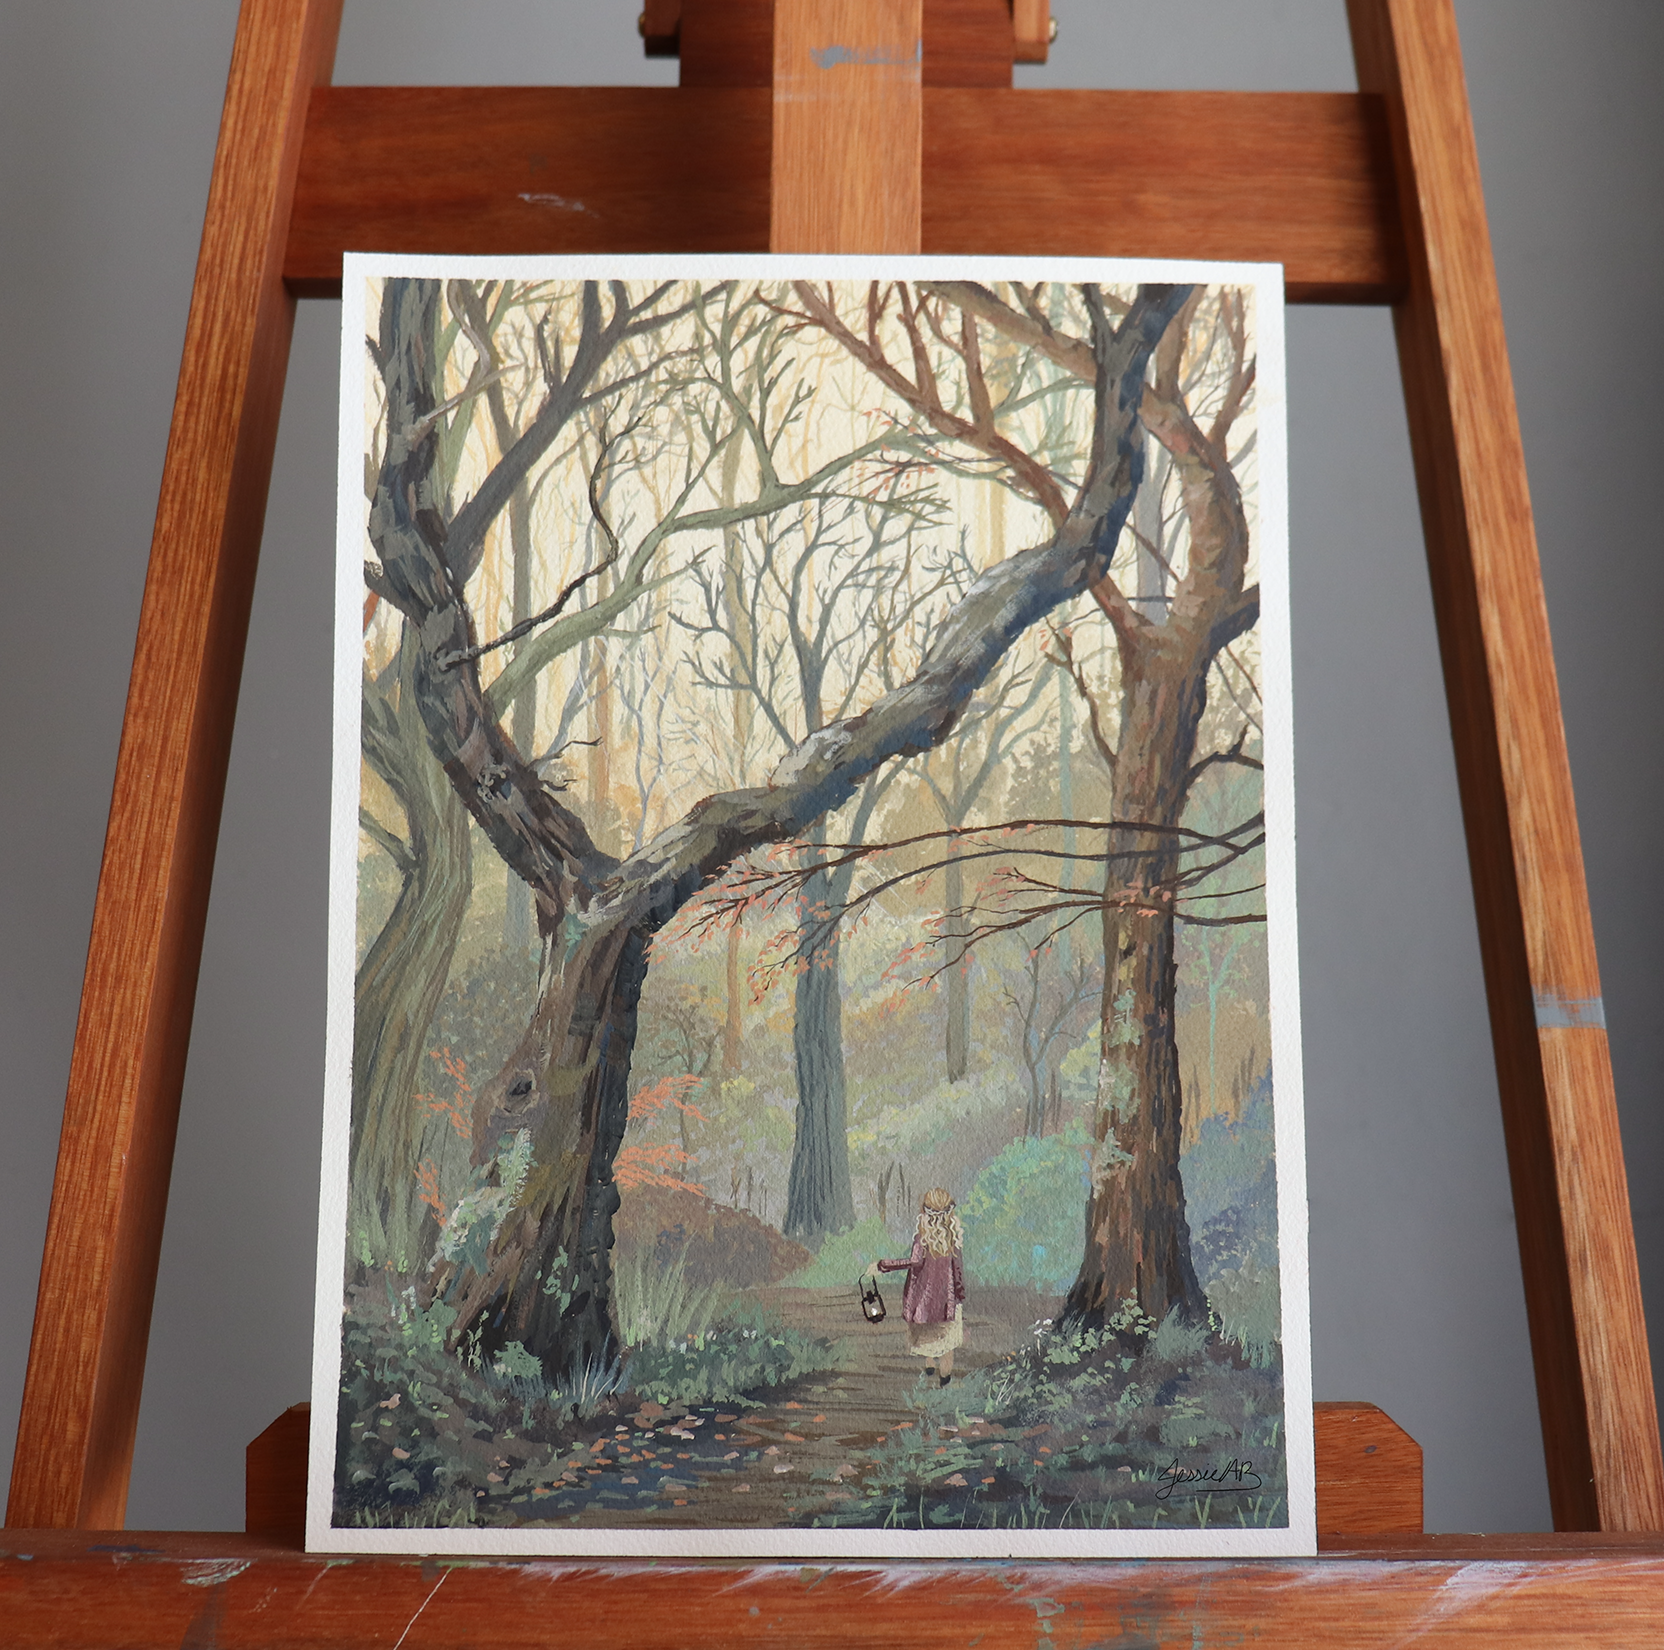 Original painting on my easel named "Passage to Metanoia" in natural lighting